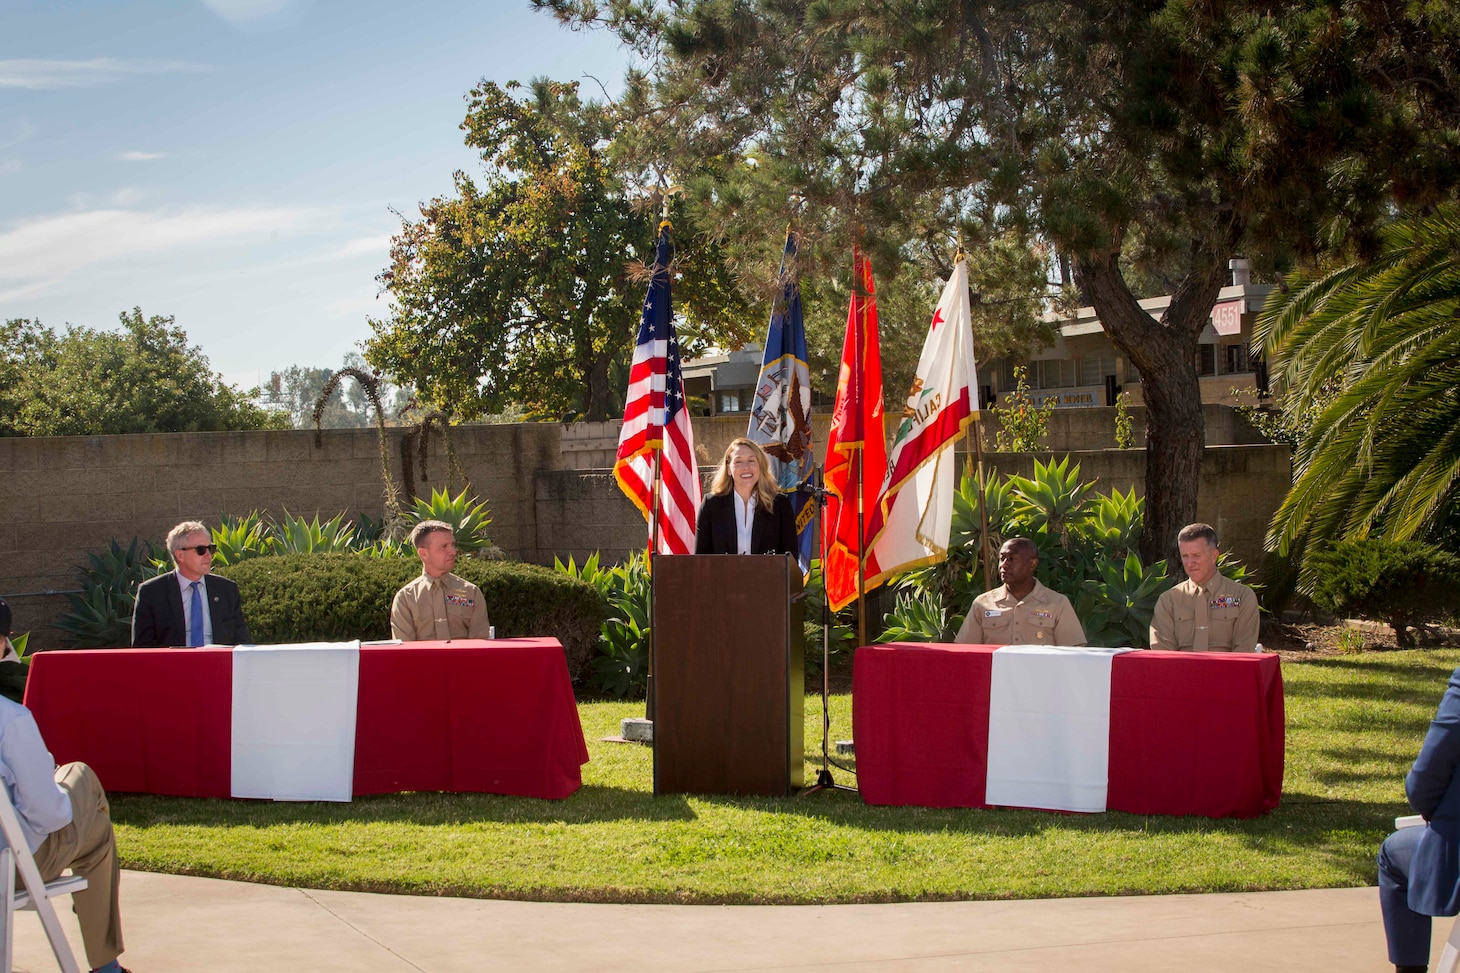 The Honorable Meredith Berger, performing the duties of the Under Secretary of the Navy,  speaks to a gathering of Marines, Sailors and local government officials of California before signing a Memorandum of Understanding with the California Energy Commission at Marine Corps Air Station Miramar, San Diego, California, Dec. 1, 2021.